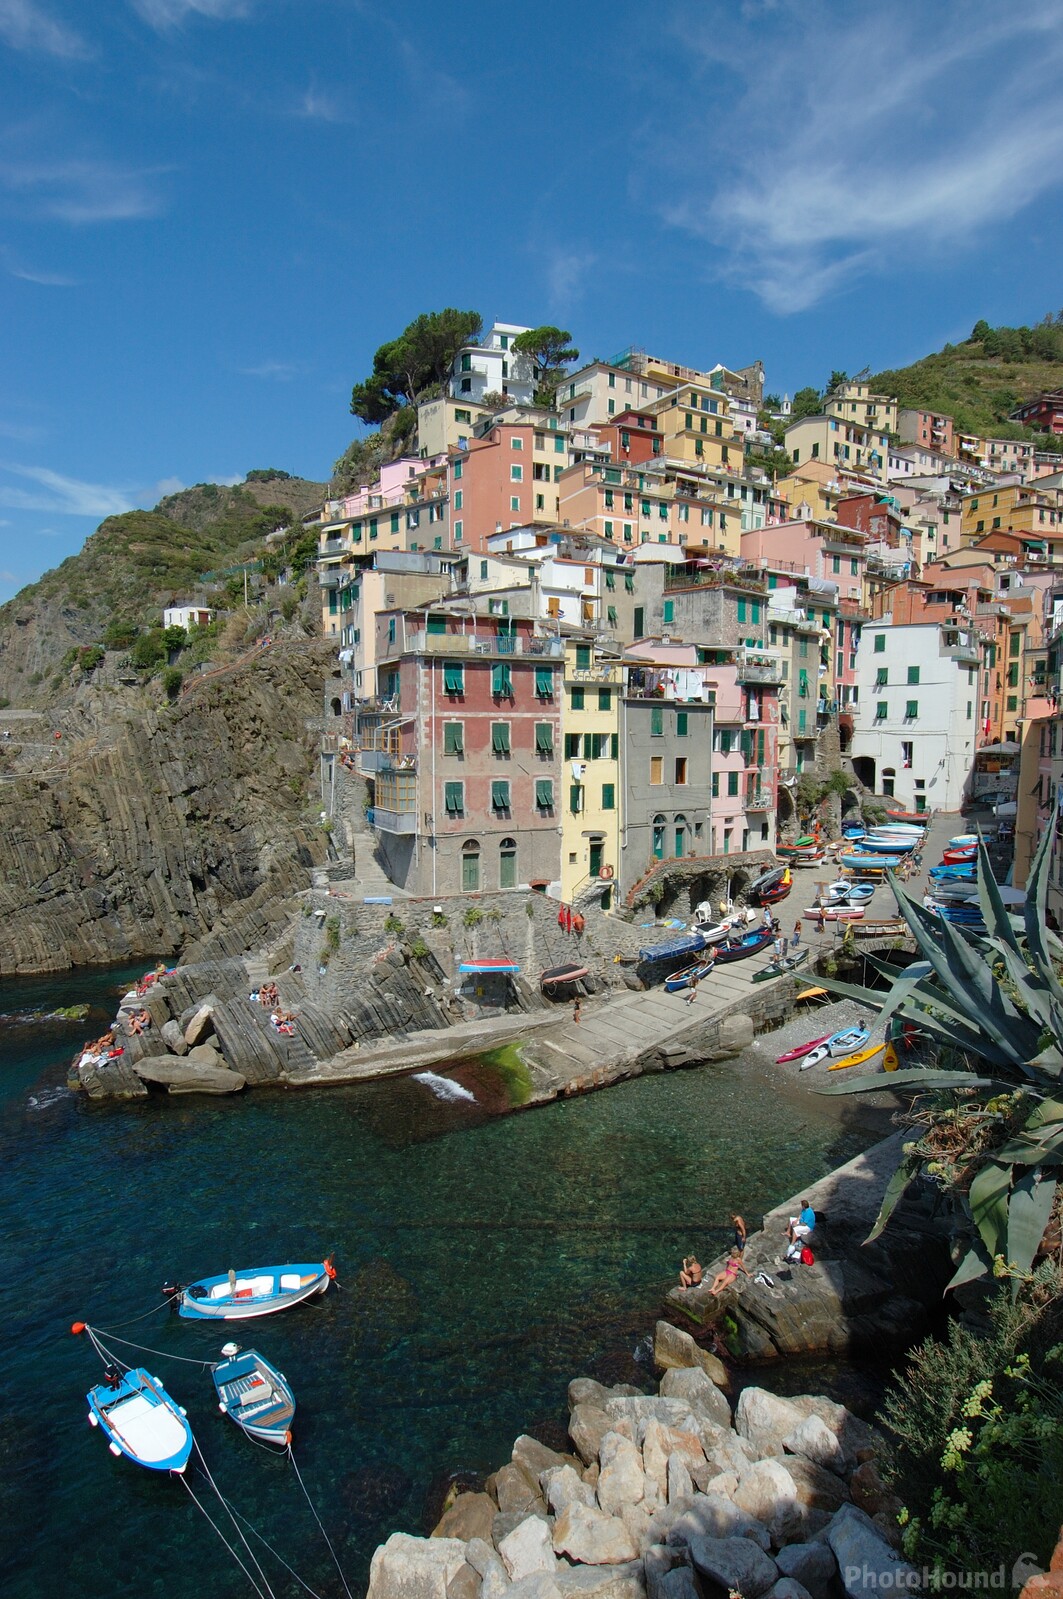 Image of Riomaggiore port by Matthew Lovell